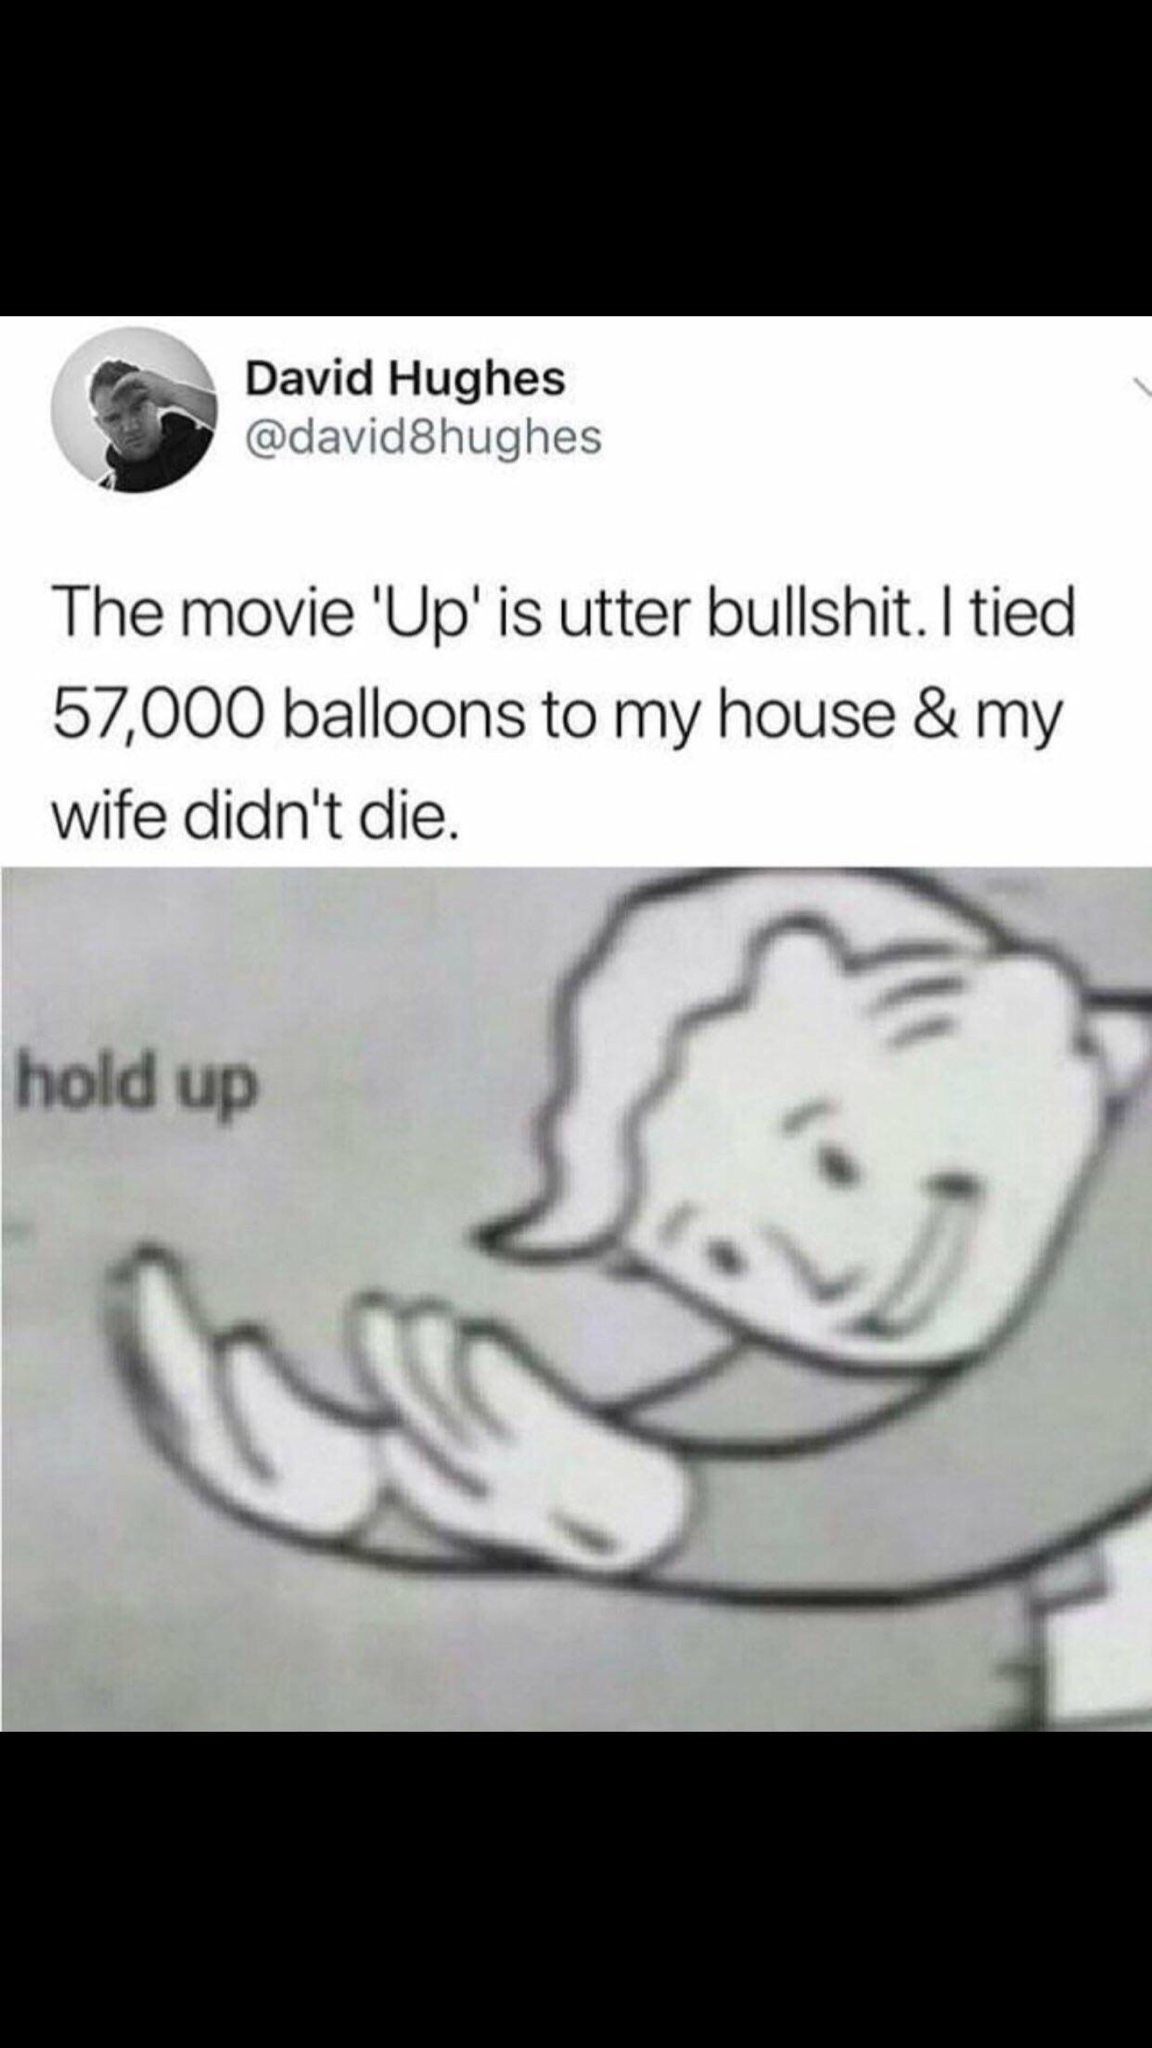 wait a minute meme - David Hughes The movie 'Up'is utter bullshit. I tied 57,000 balloons to my house & my wife didn't die. hold up